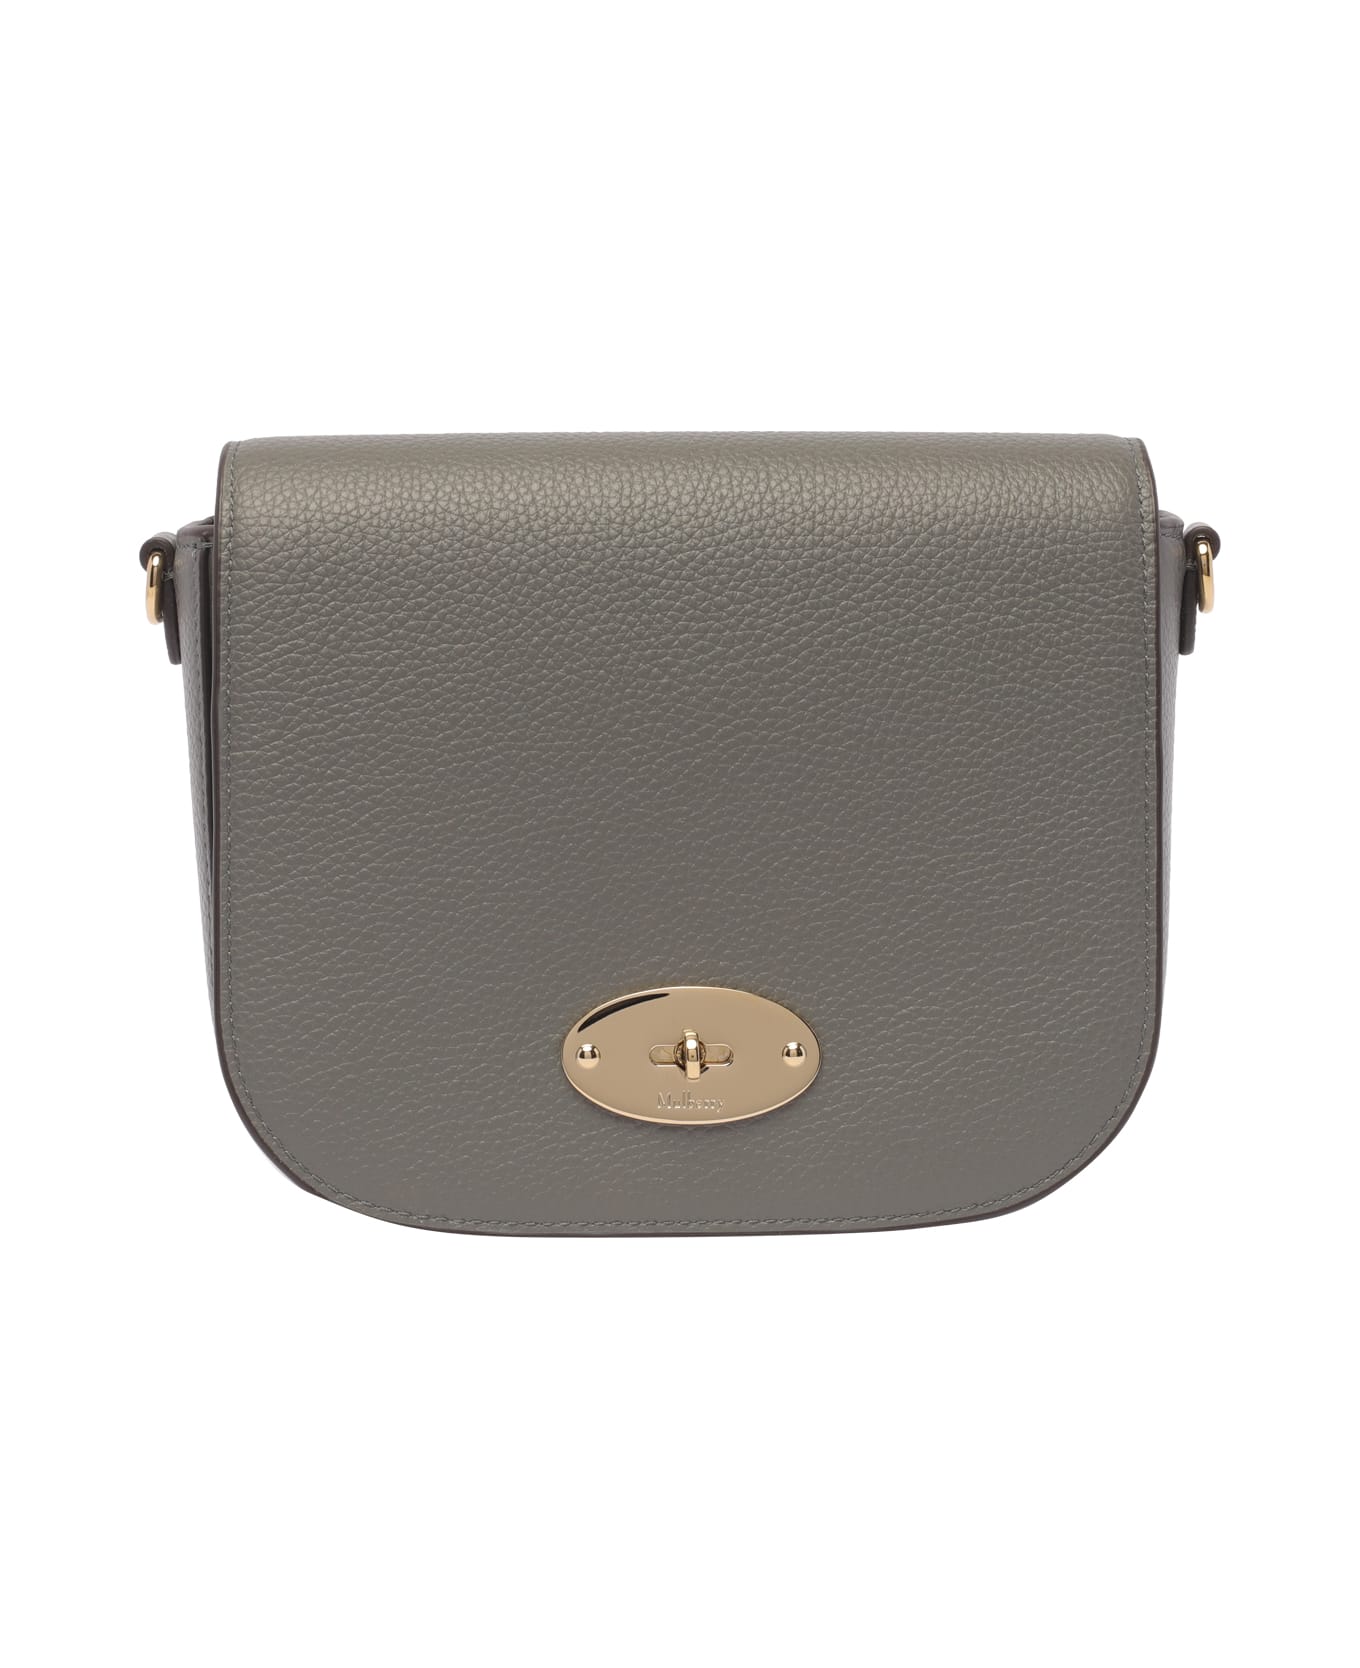 Mulberry Small Darley Satchel Classic Bag - Grey トートバッグ